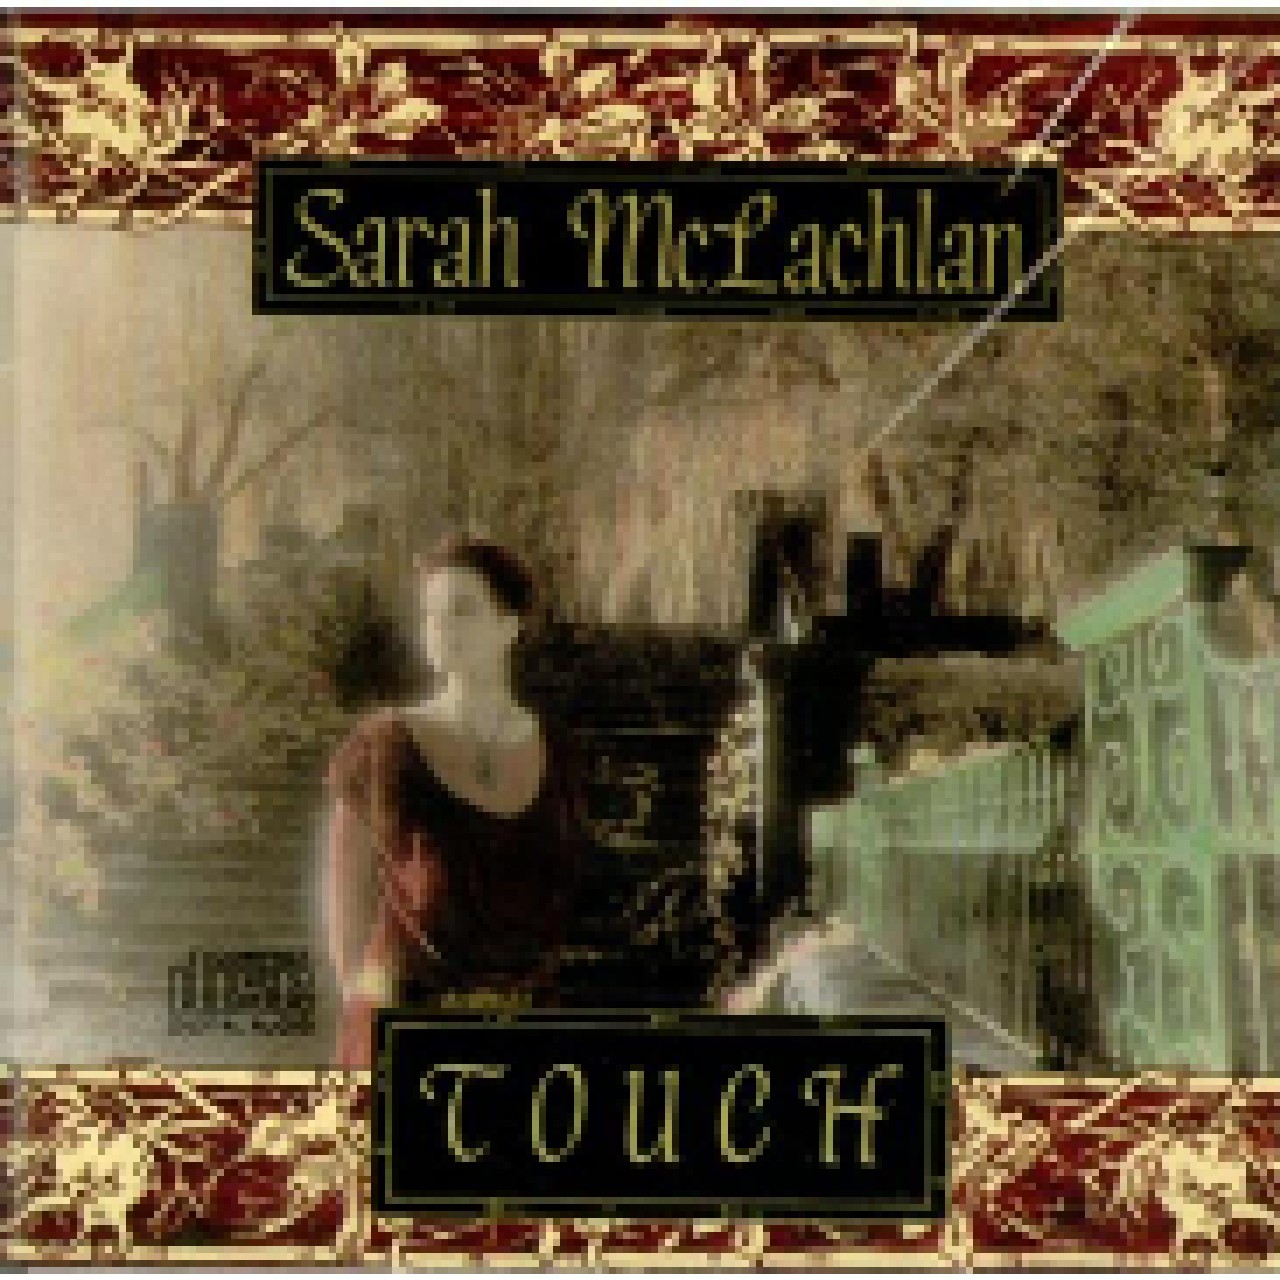 sarah mclachlan vox meaning